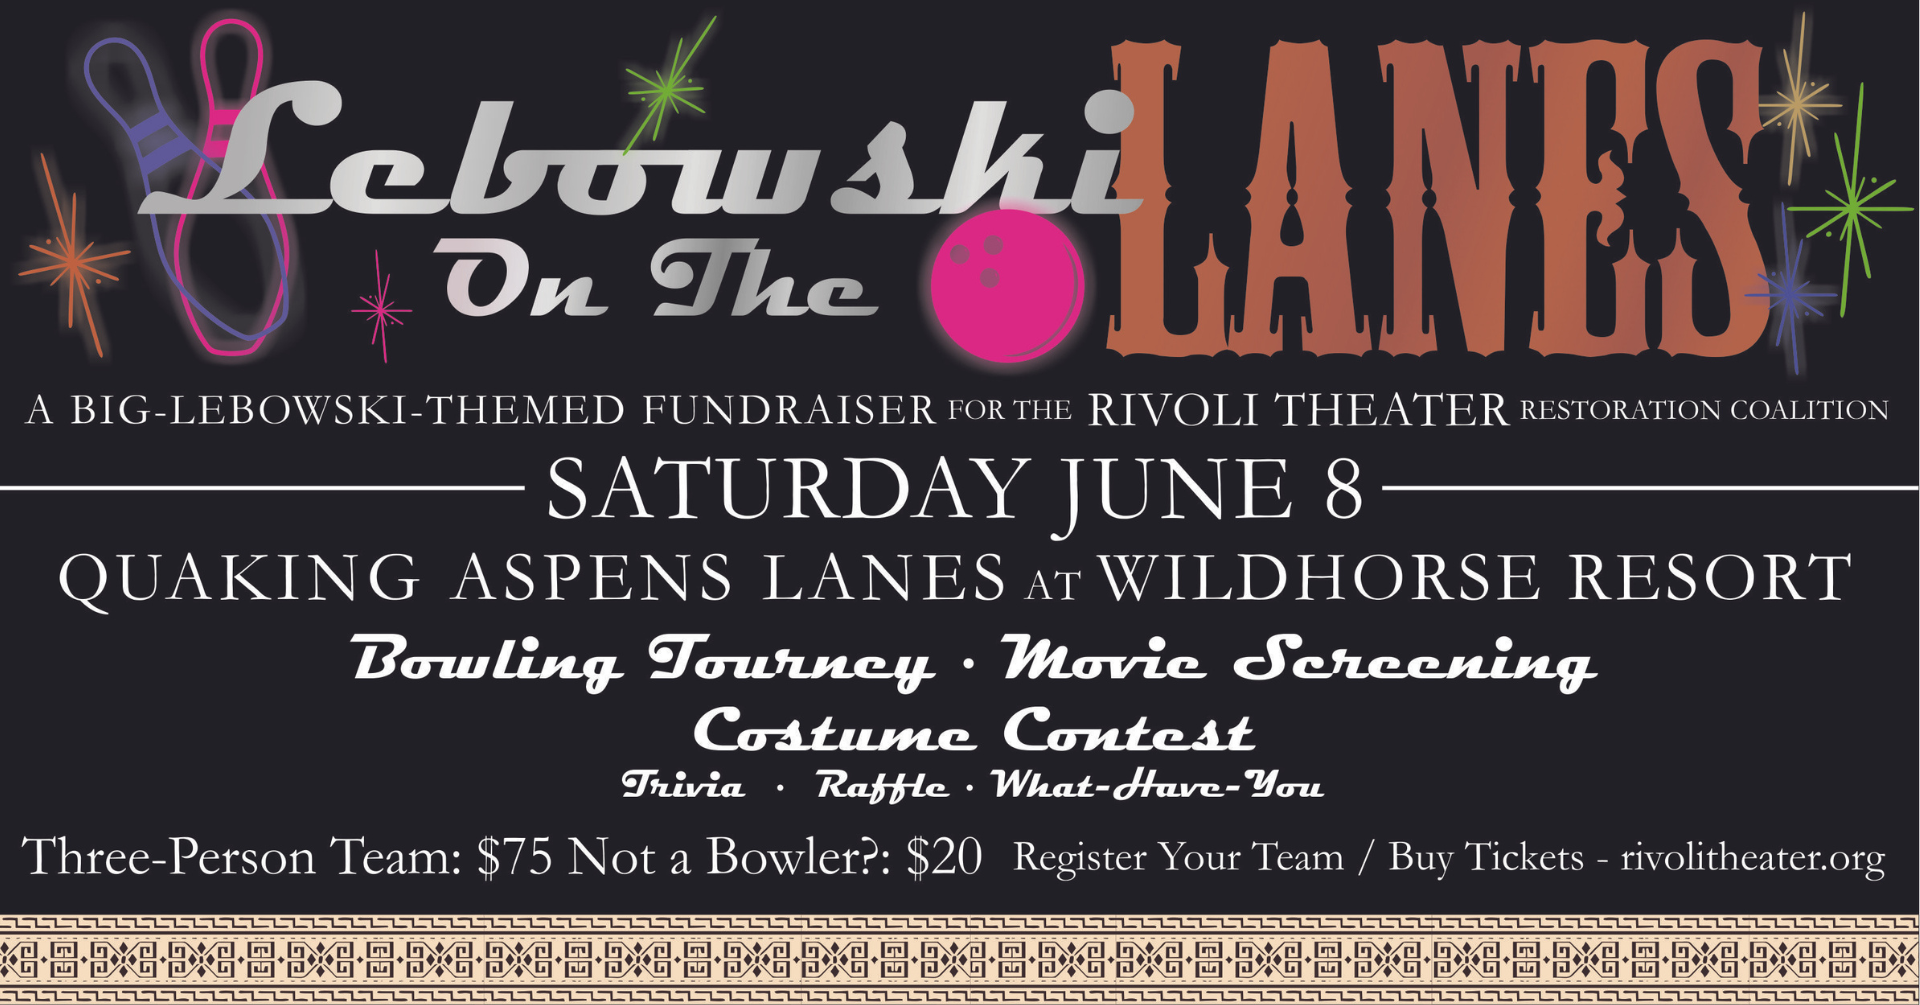 An event poster with neon bowling pins in the background with text reading: “Lebowski on the Lanes: A Big Lebowski-Themed Fundraiser for the Rivoli Theater Restoration Coalition. Saturday, June 8. Quaking Aspens Lanes at Wildhorse Resort. Bowling Tourney, Movie Screening, Costume Contest, Trivia, Raffle, What-Have-You. Three Person Team: $75. Not a Bowler? $20. Register your team/buy tickets: rivolitheater.org.”